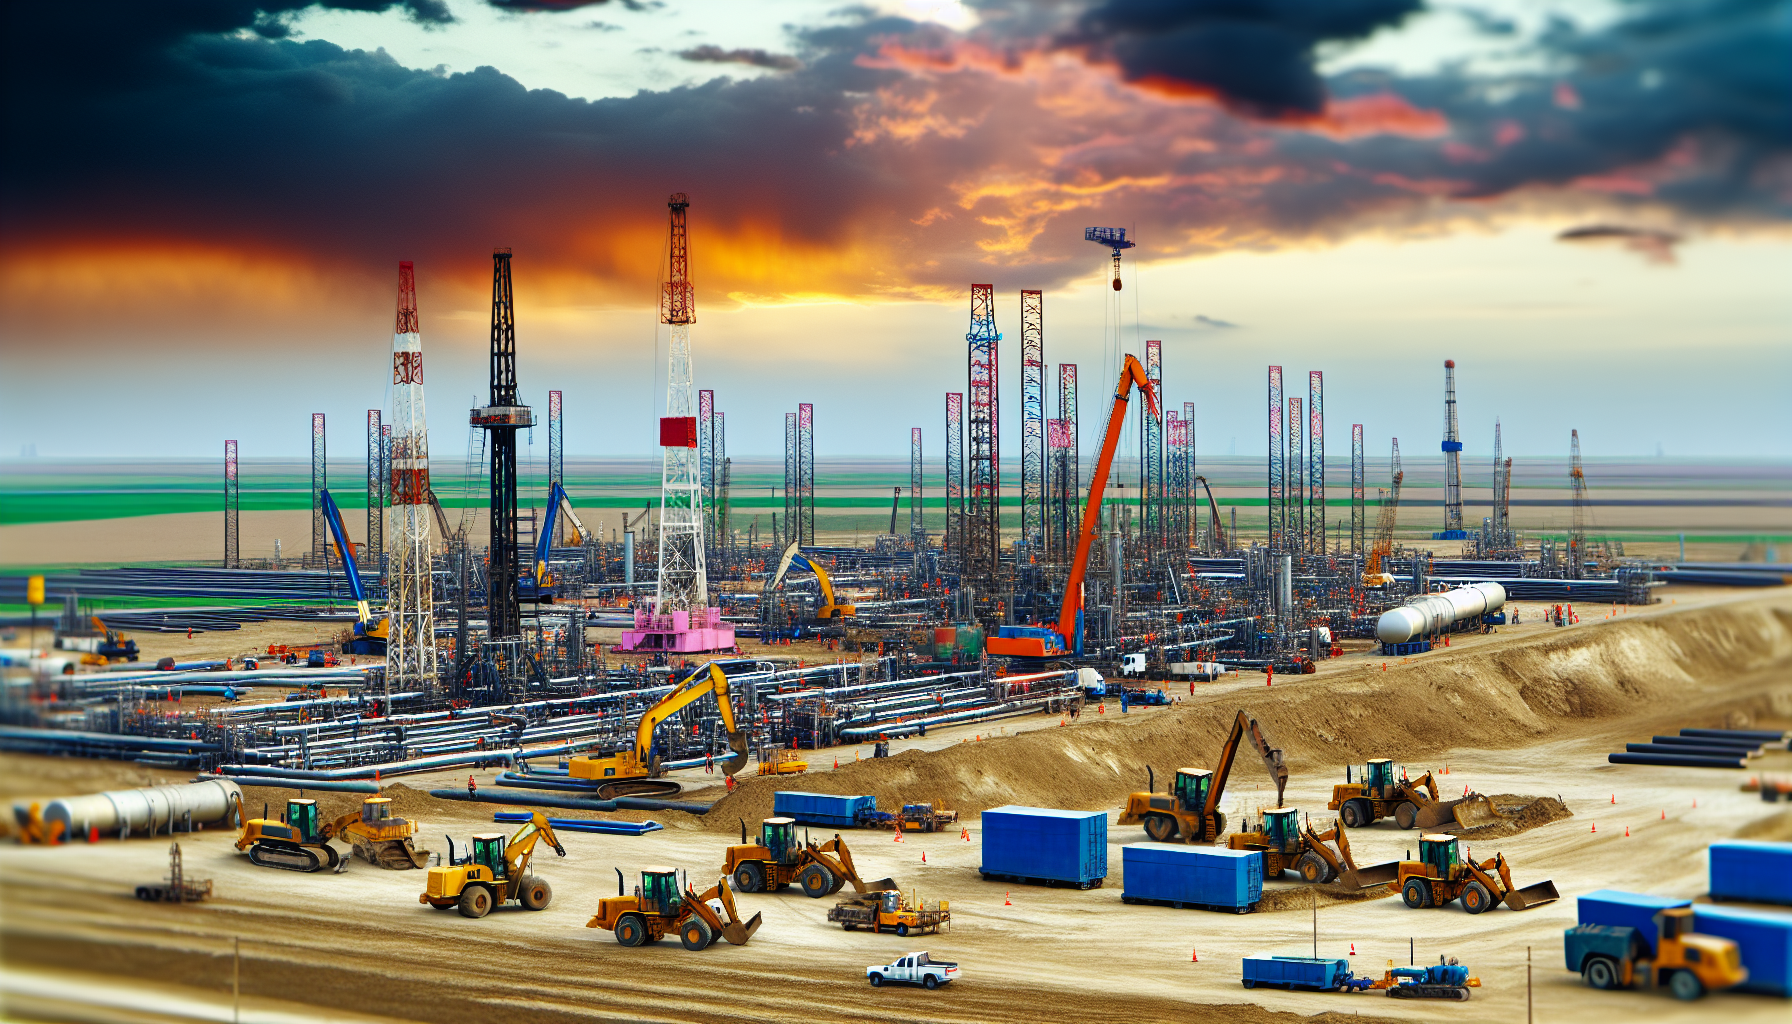 Common causes of oilfield accidents